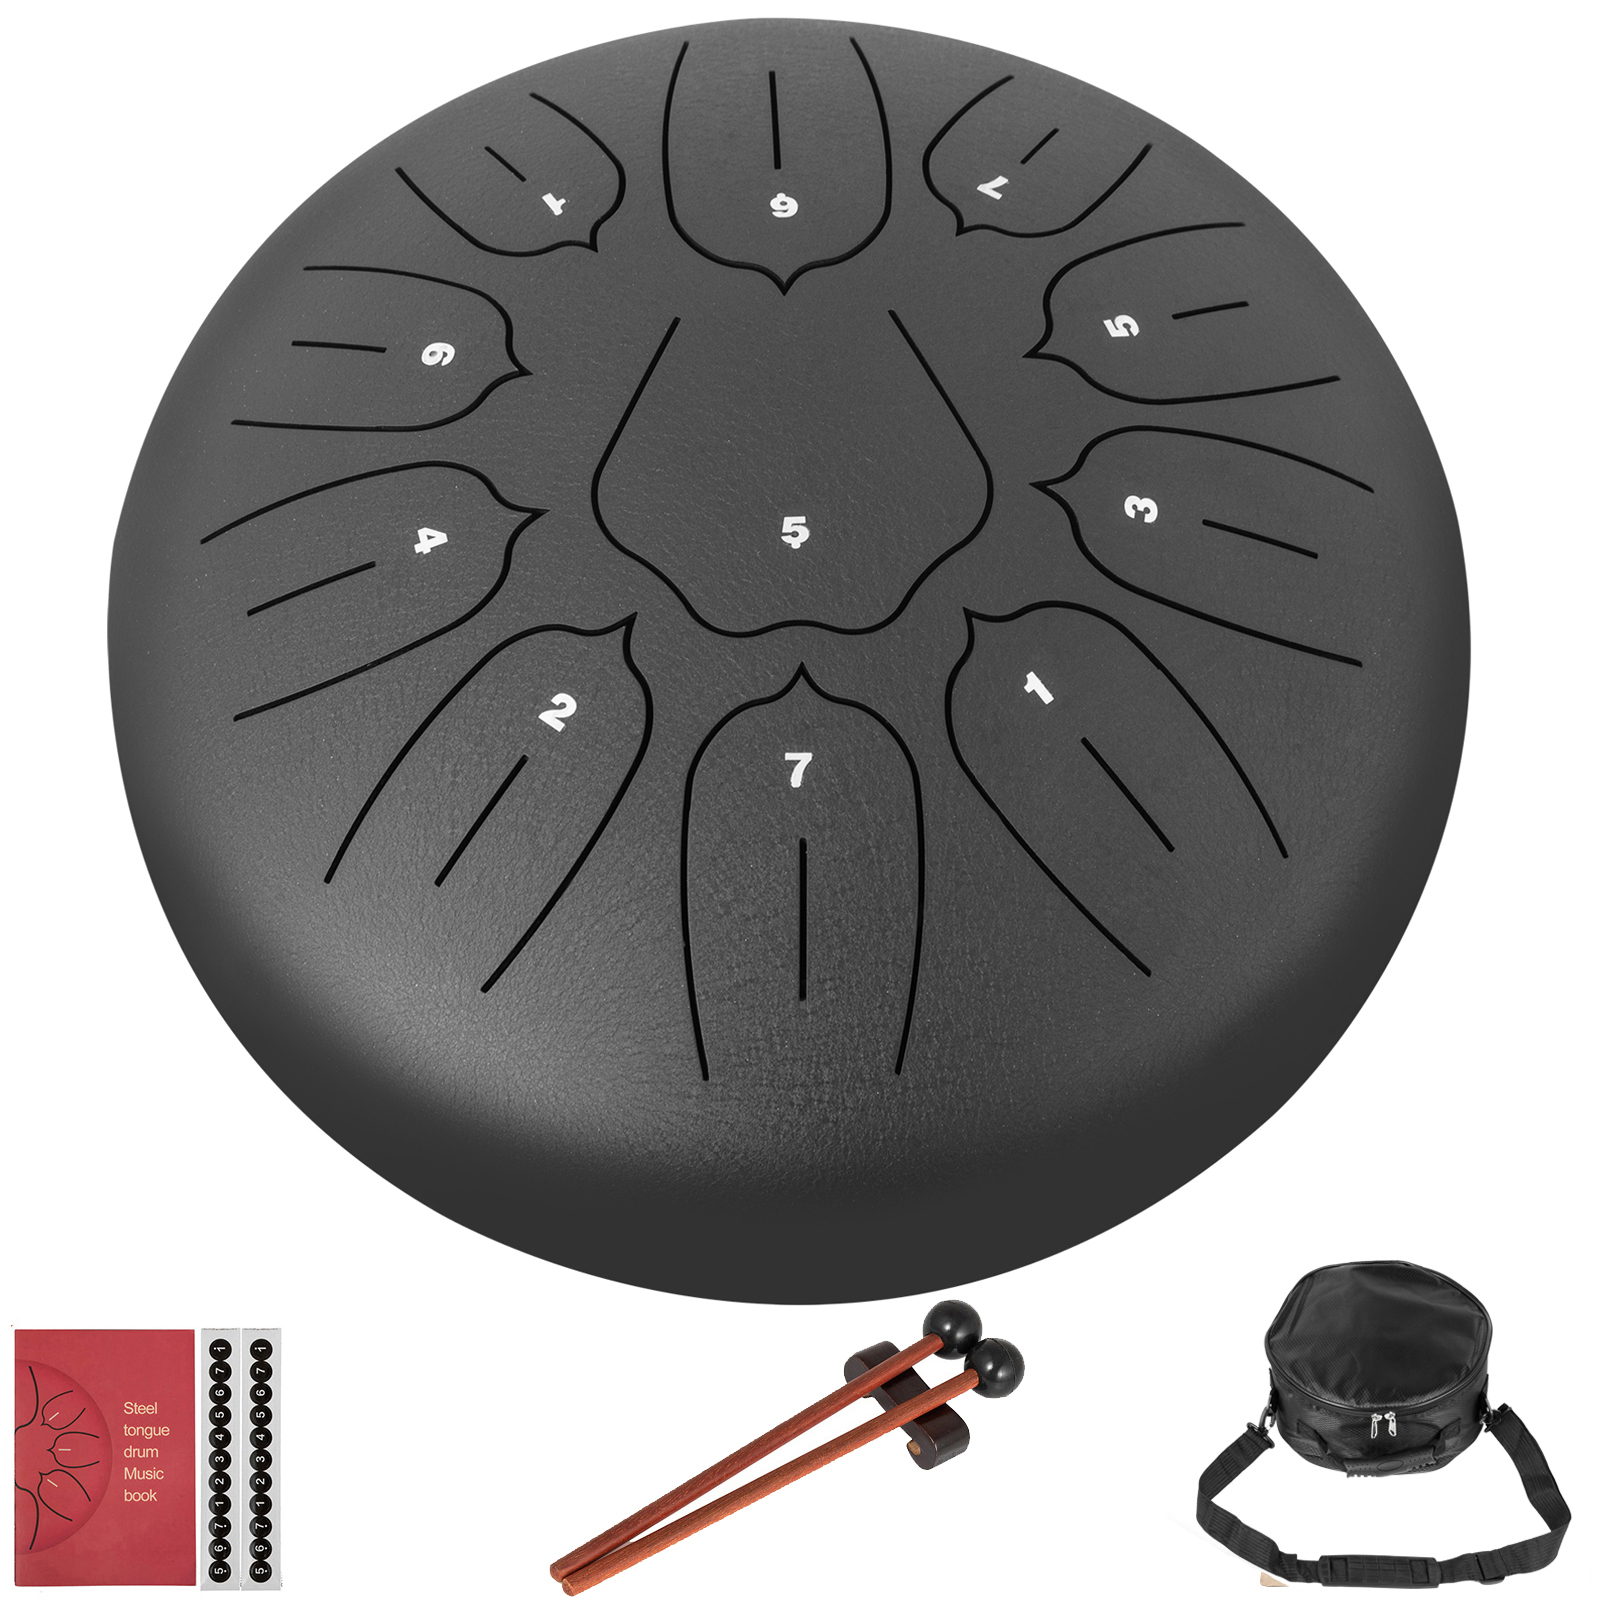 10" Steel Tongue Drum Handpan Drum 11 Notes Black Meditation With Bag Music Book от Vevor Many GEOs